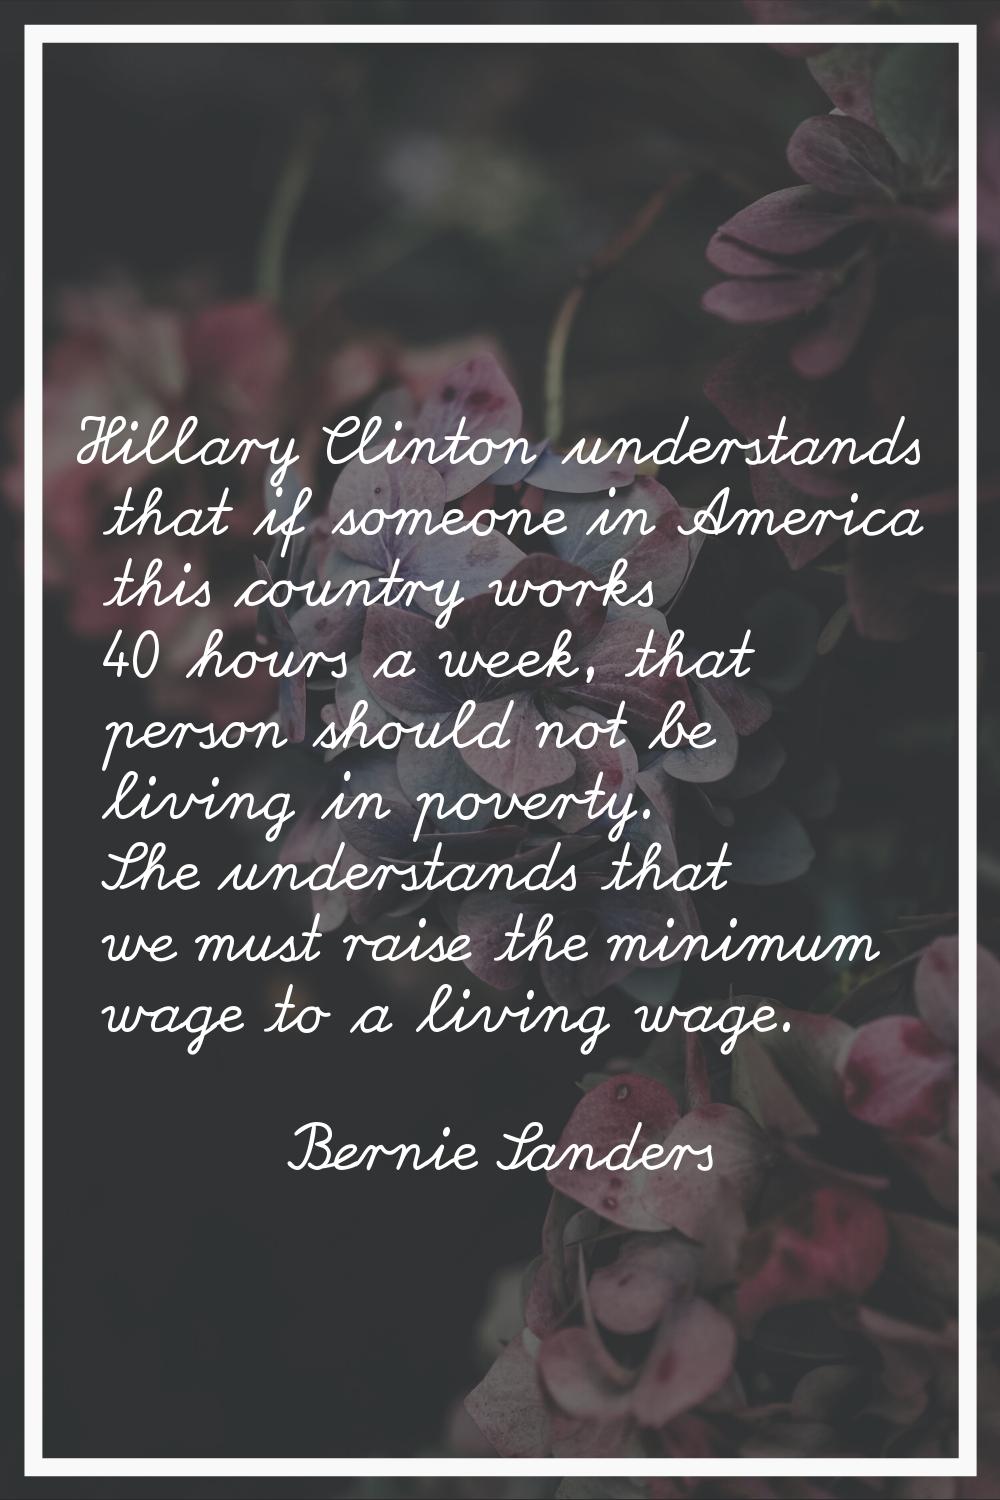 Hillary Clinton understands that if someone in America this country works 40 hours a week, that per